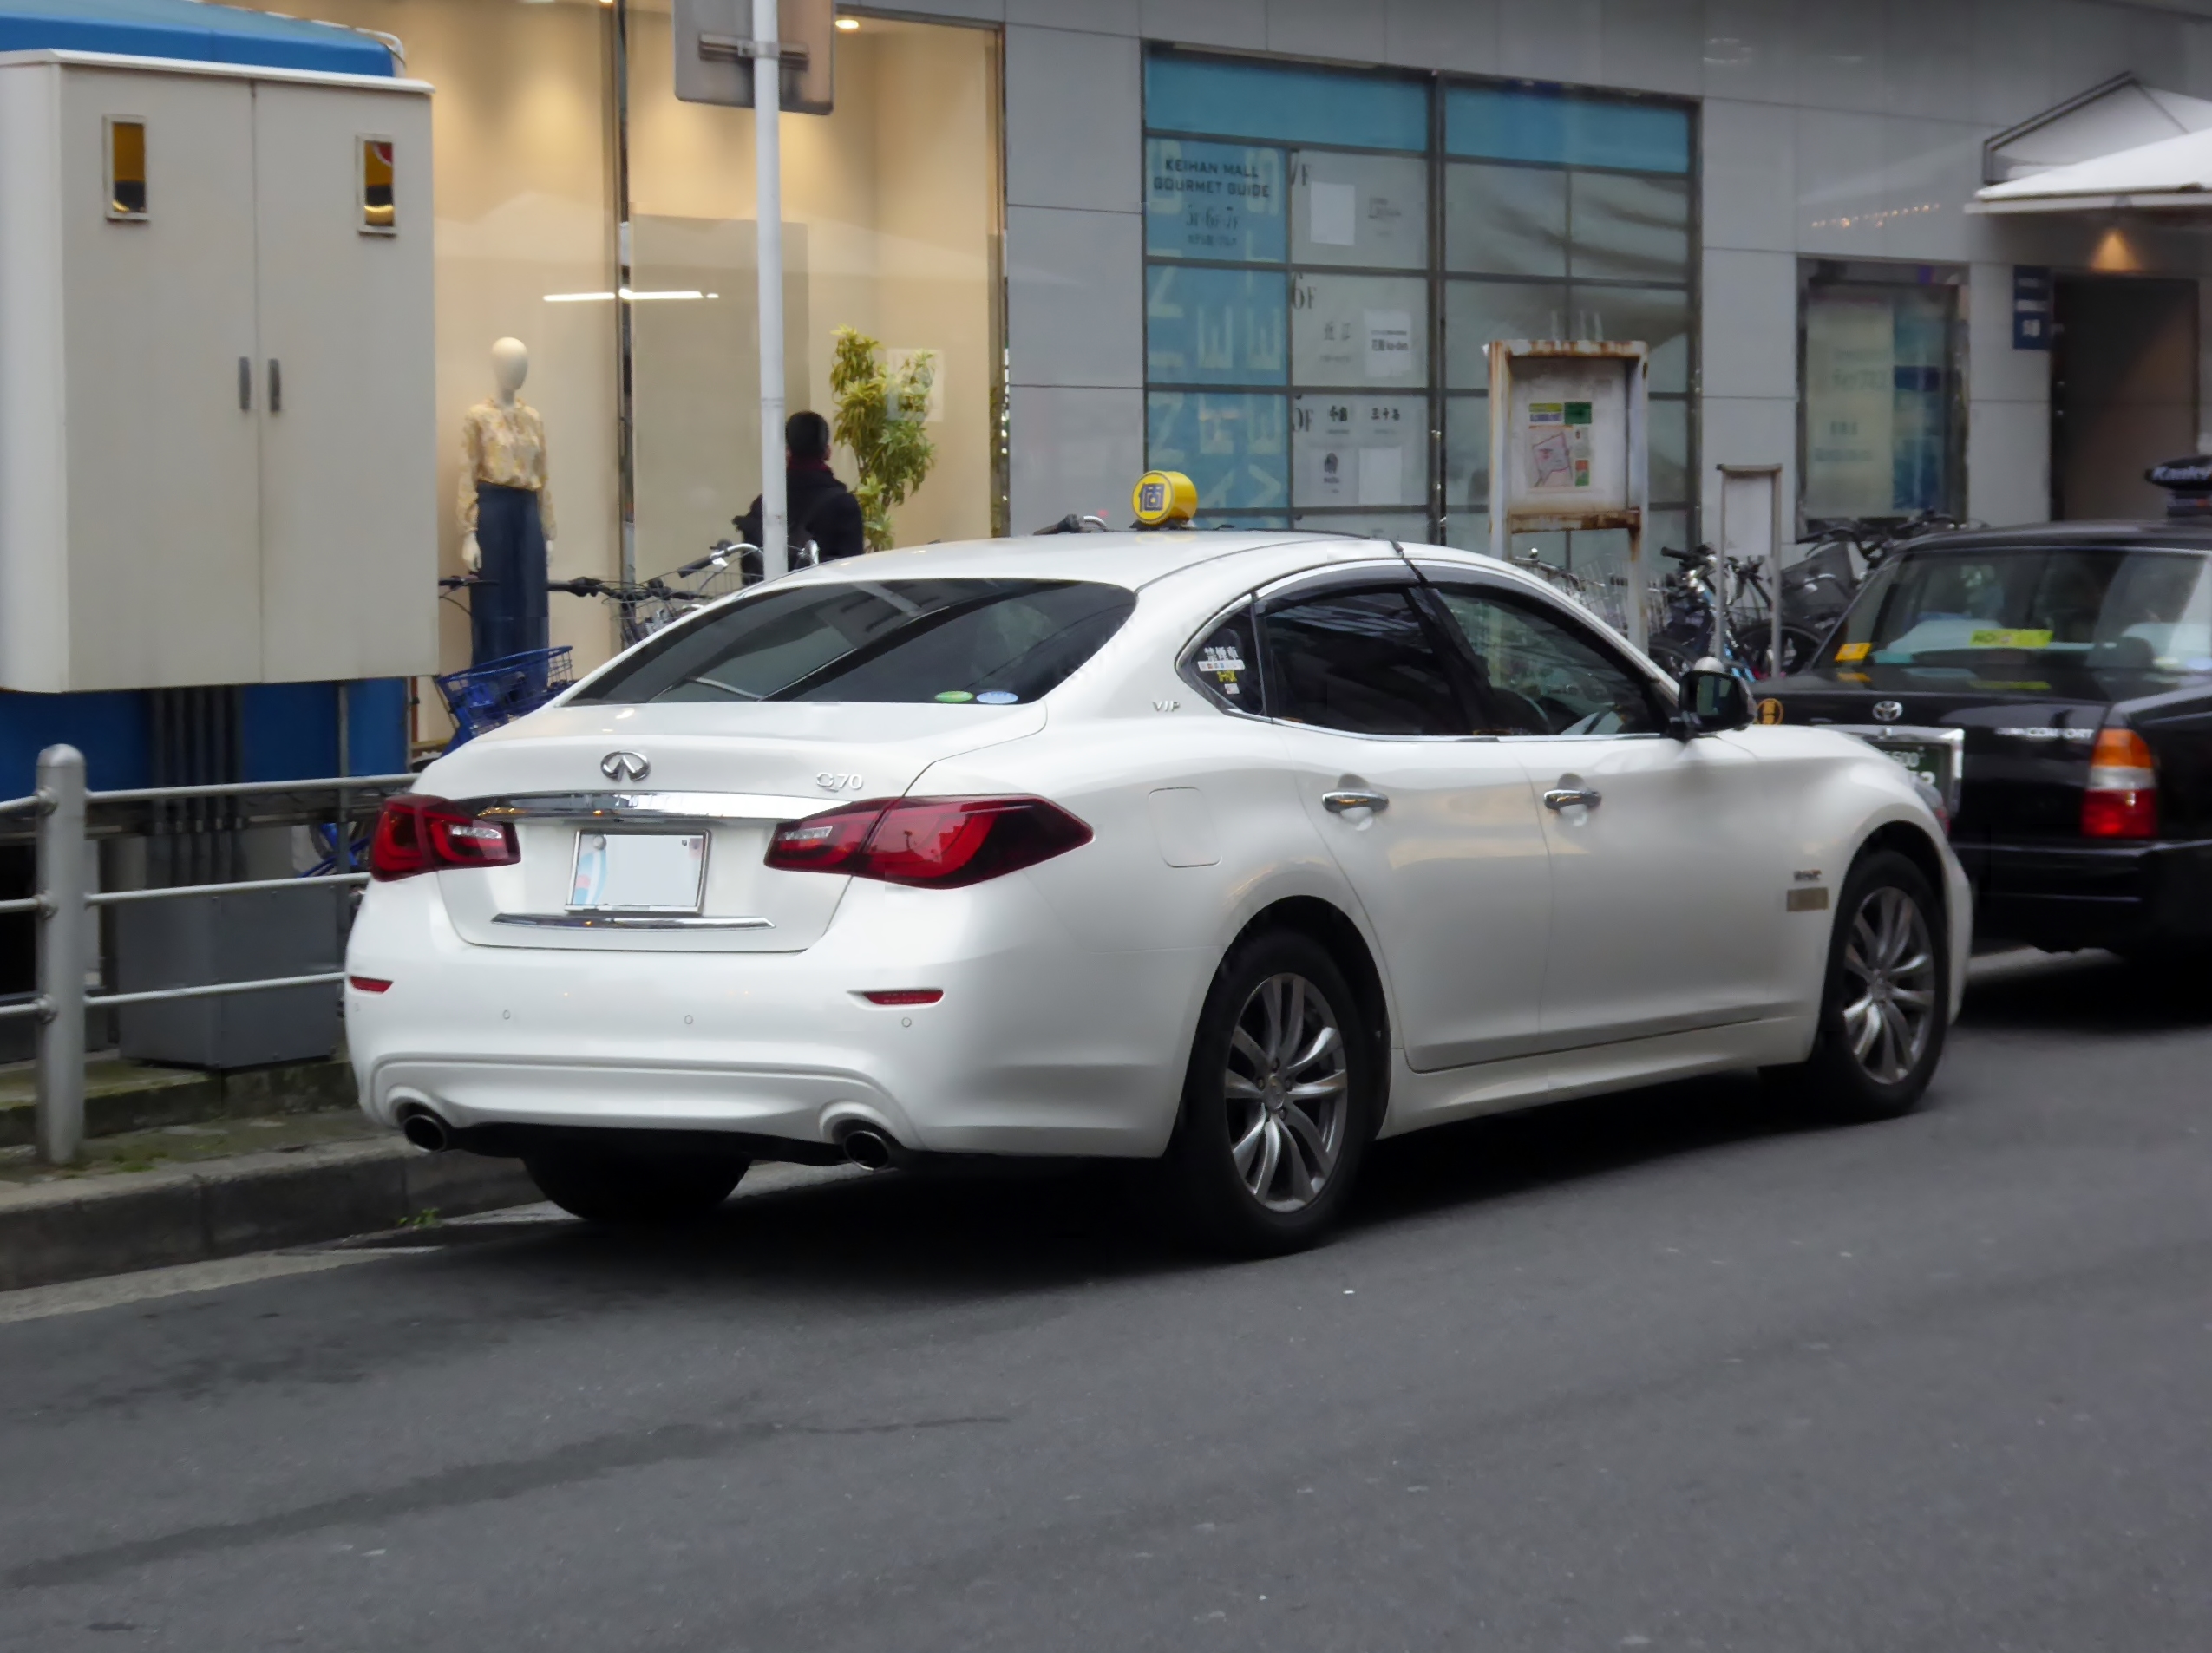 File The Rearview Of Infiniti Q70 Hybrid Vip Daa Hy51 Privately Owned Taxi Jpg Wikimedia Commons